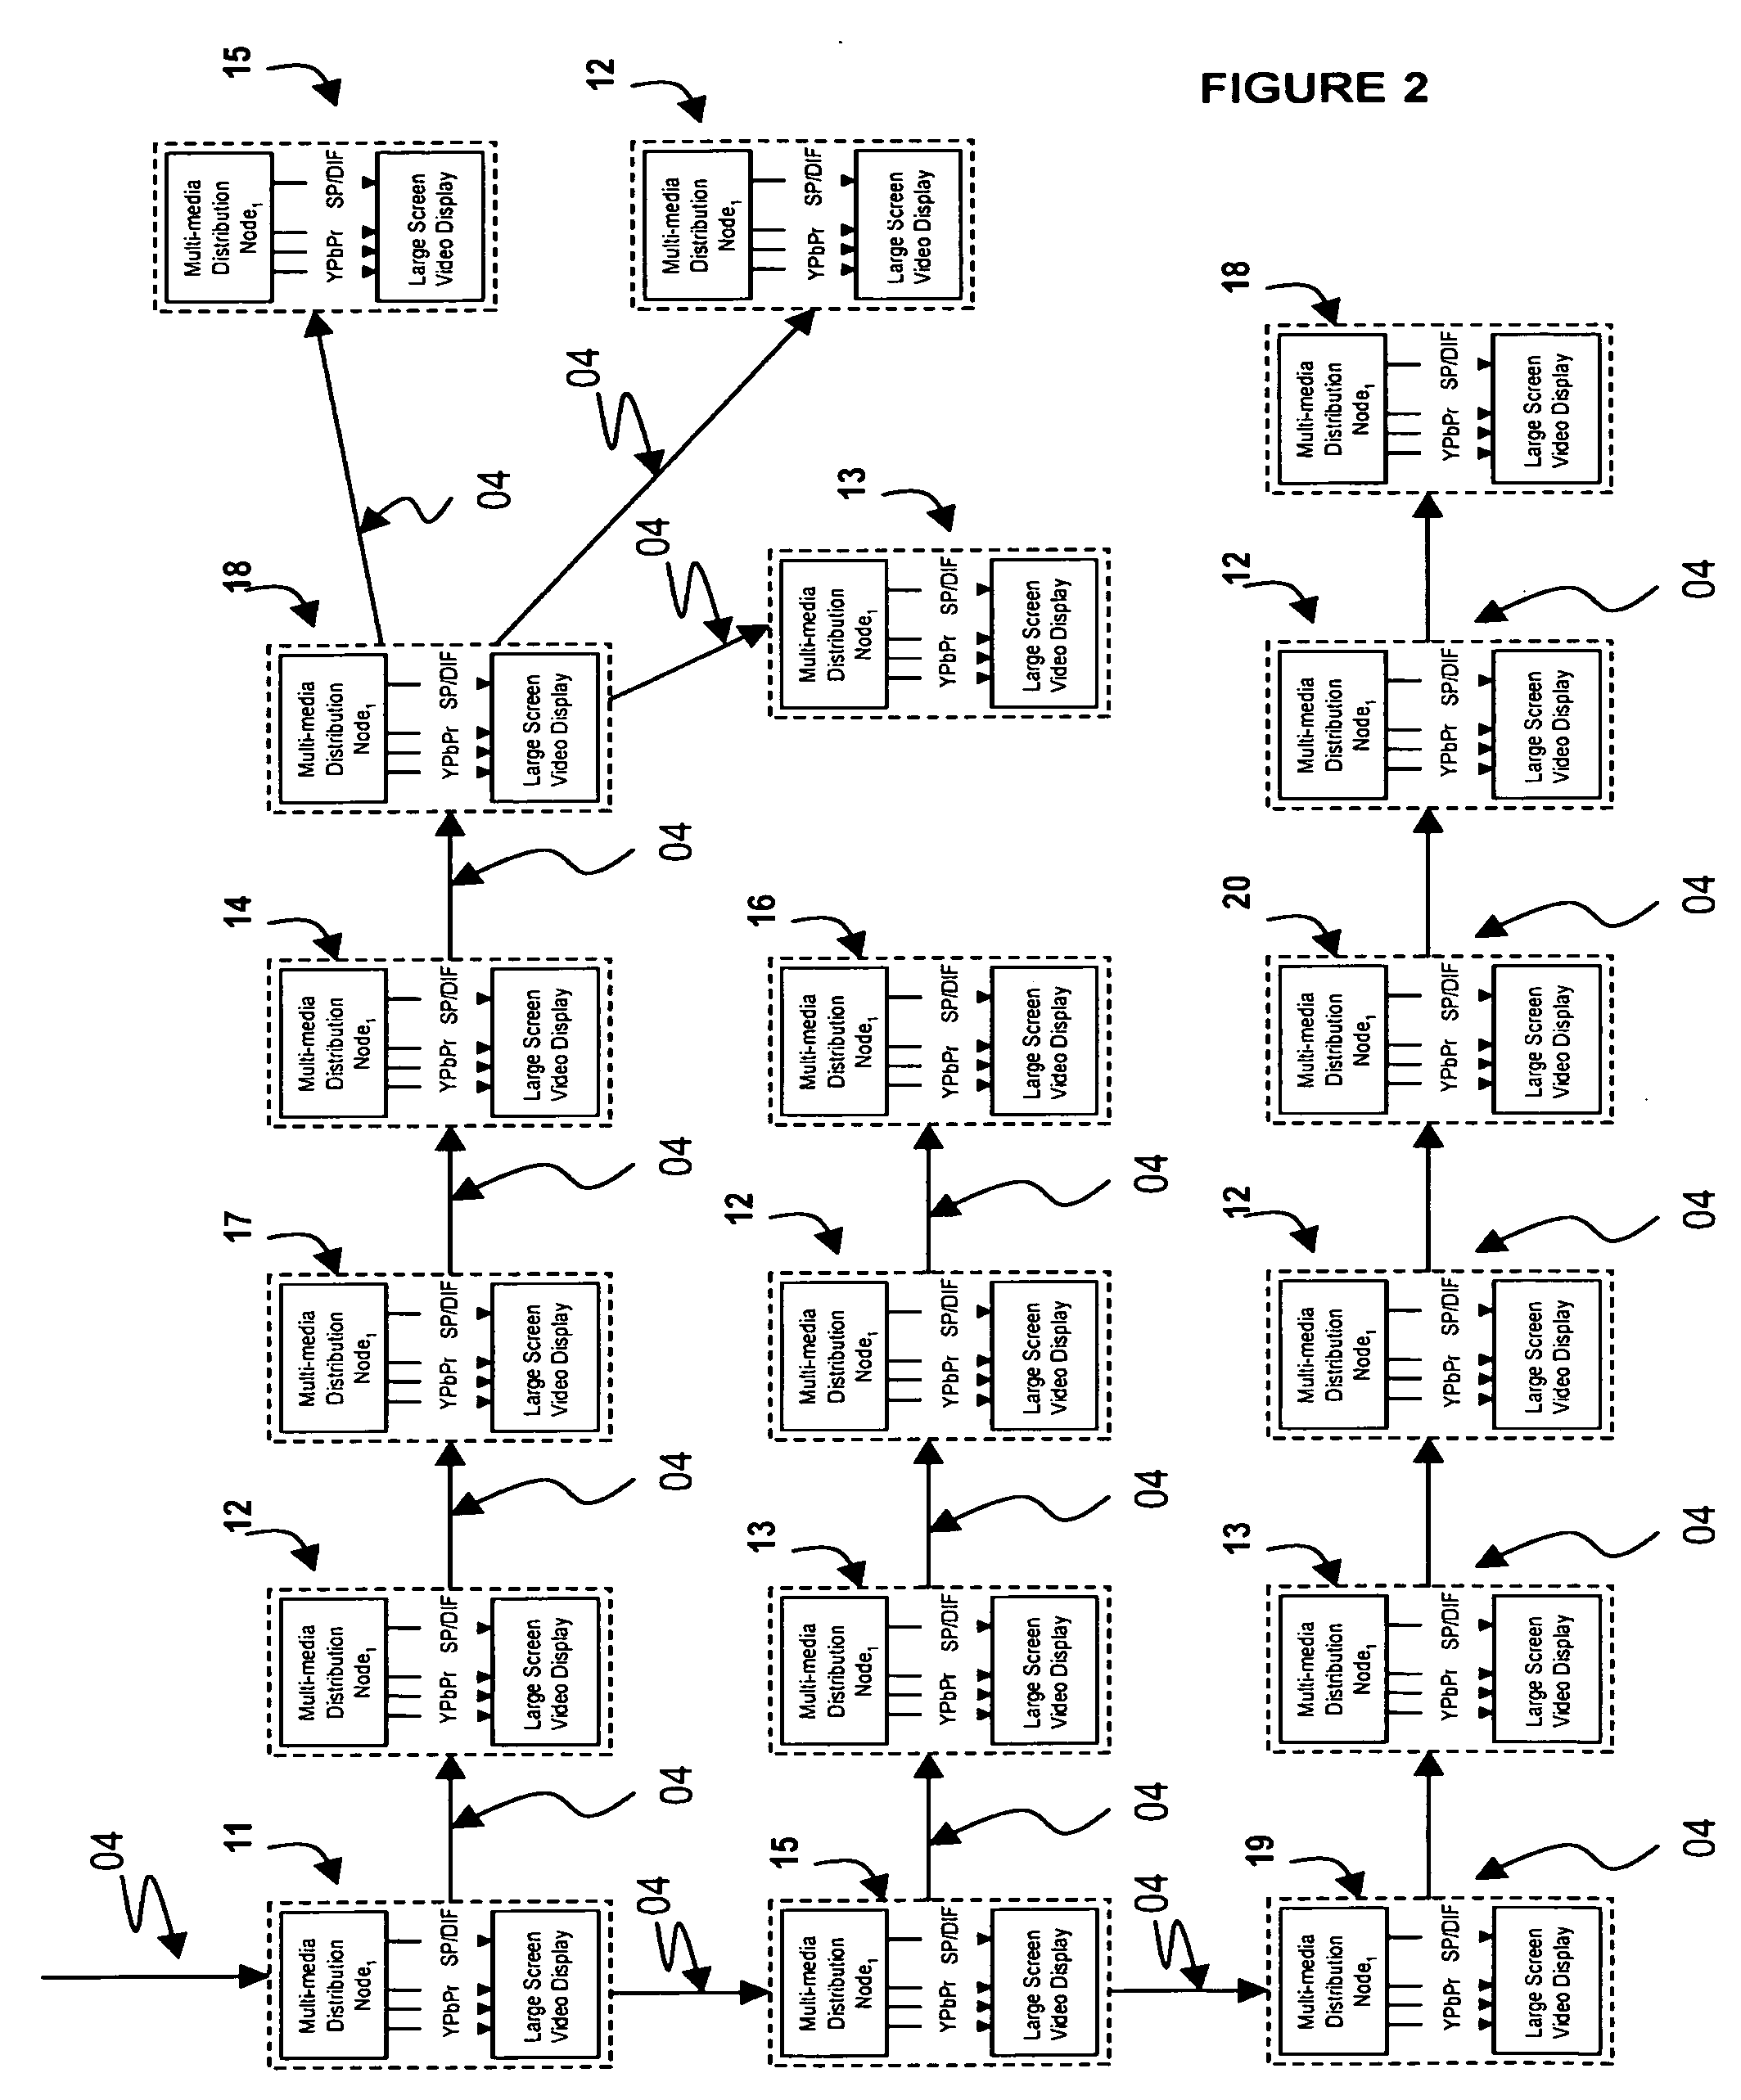 System for distribution of numerous streams of multimedia content to a multiplicity of video displays